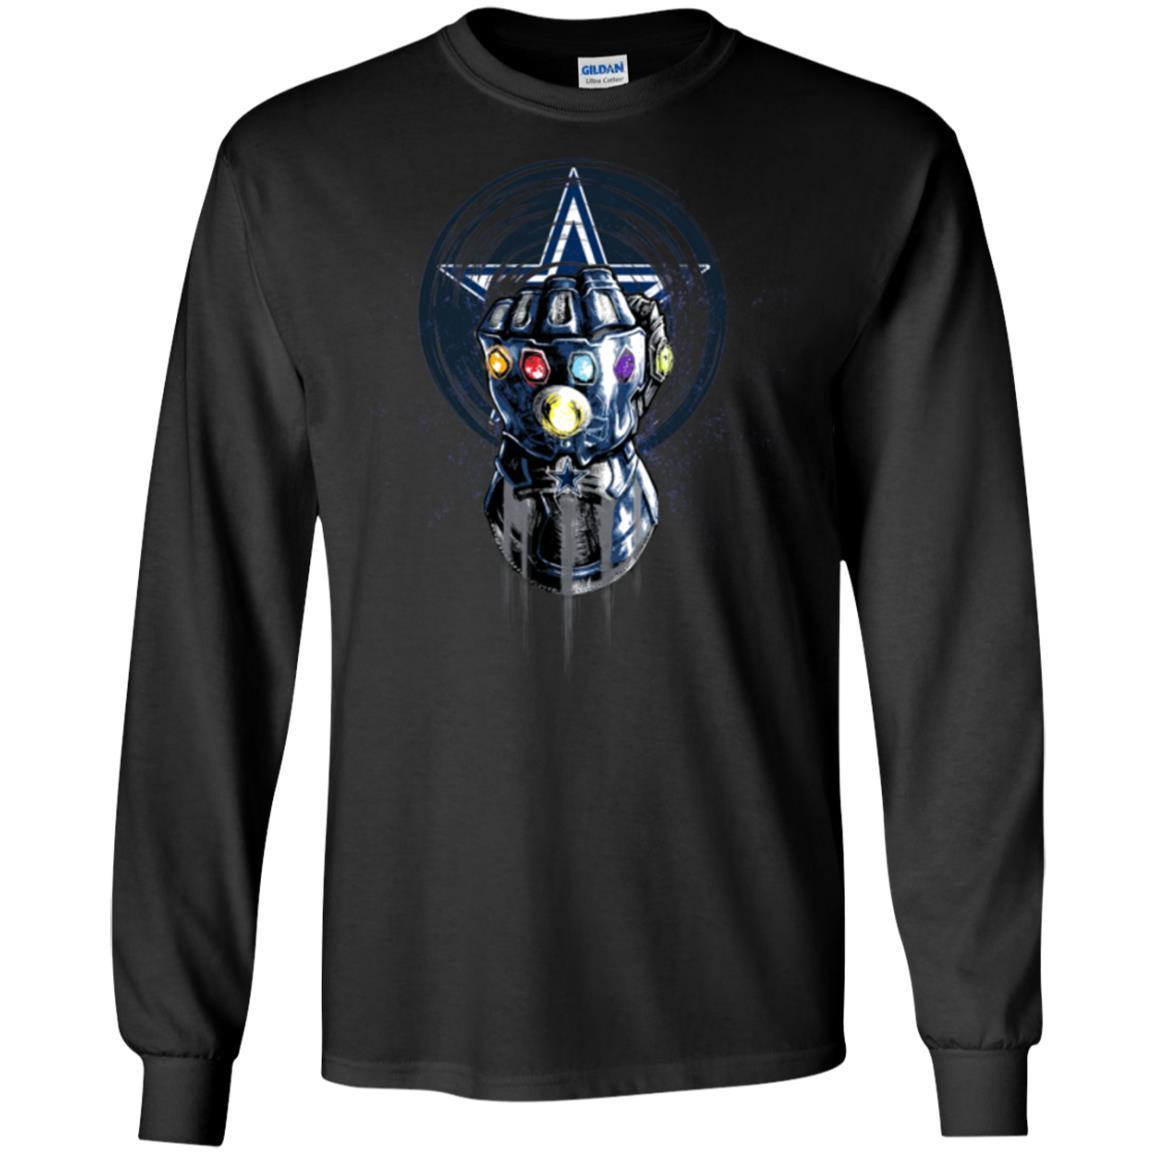 Order The Infinity Gauntlet Thanos Dallas Cow Tee T Shirt